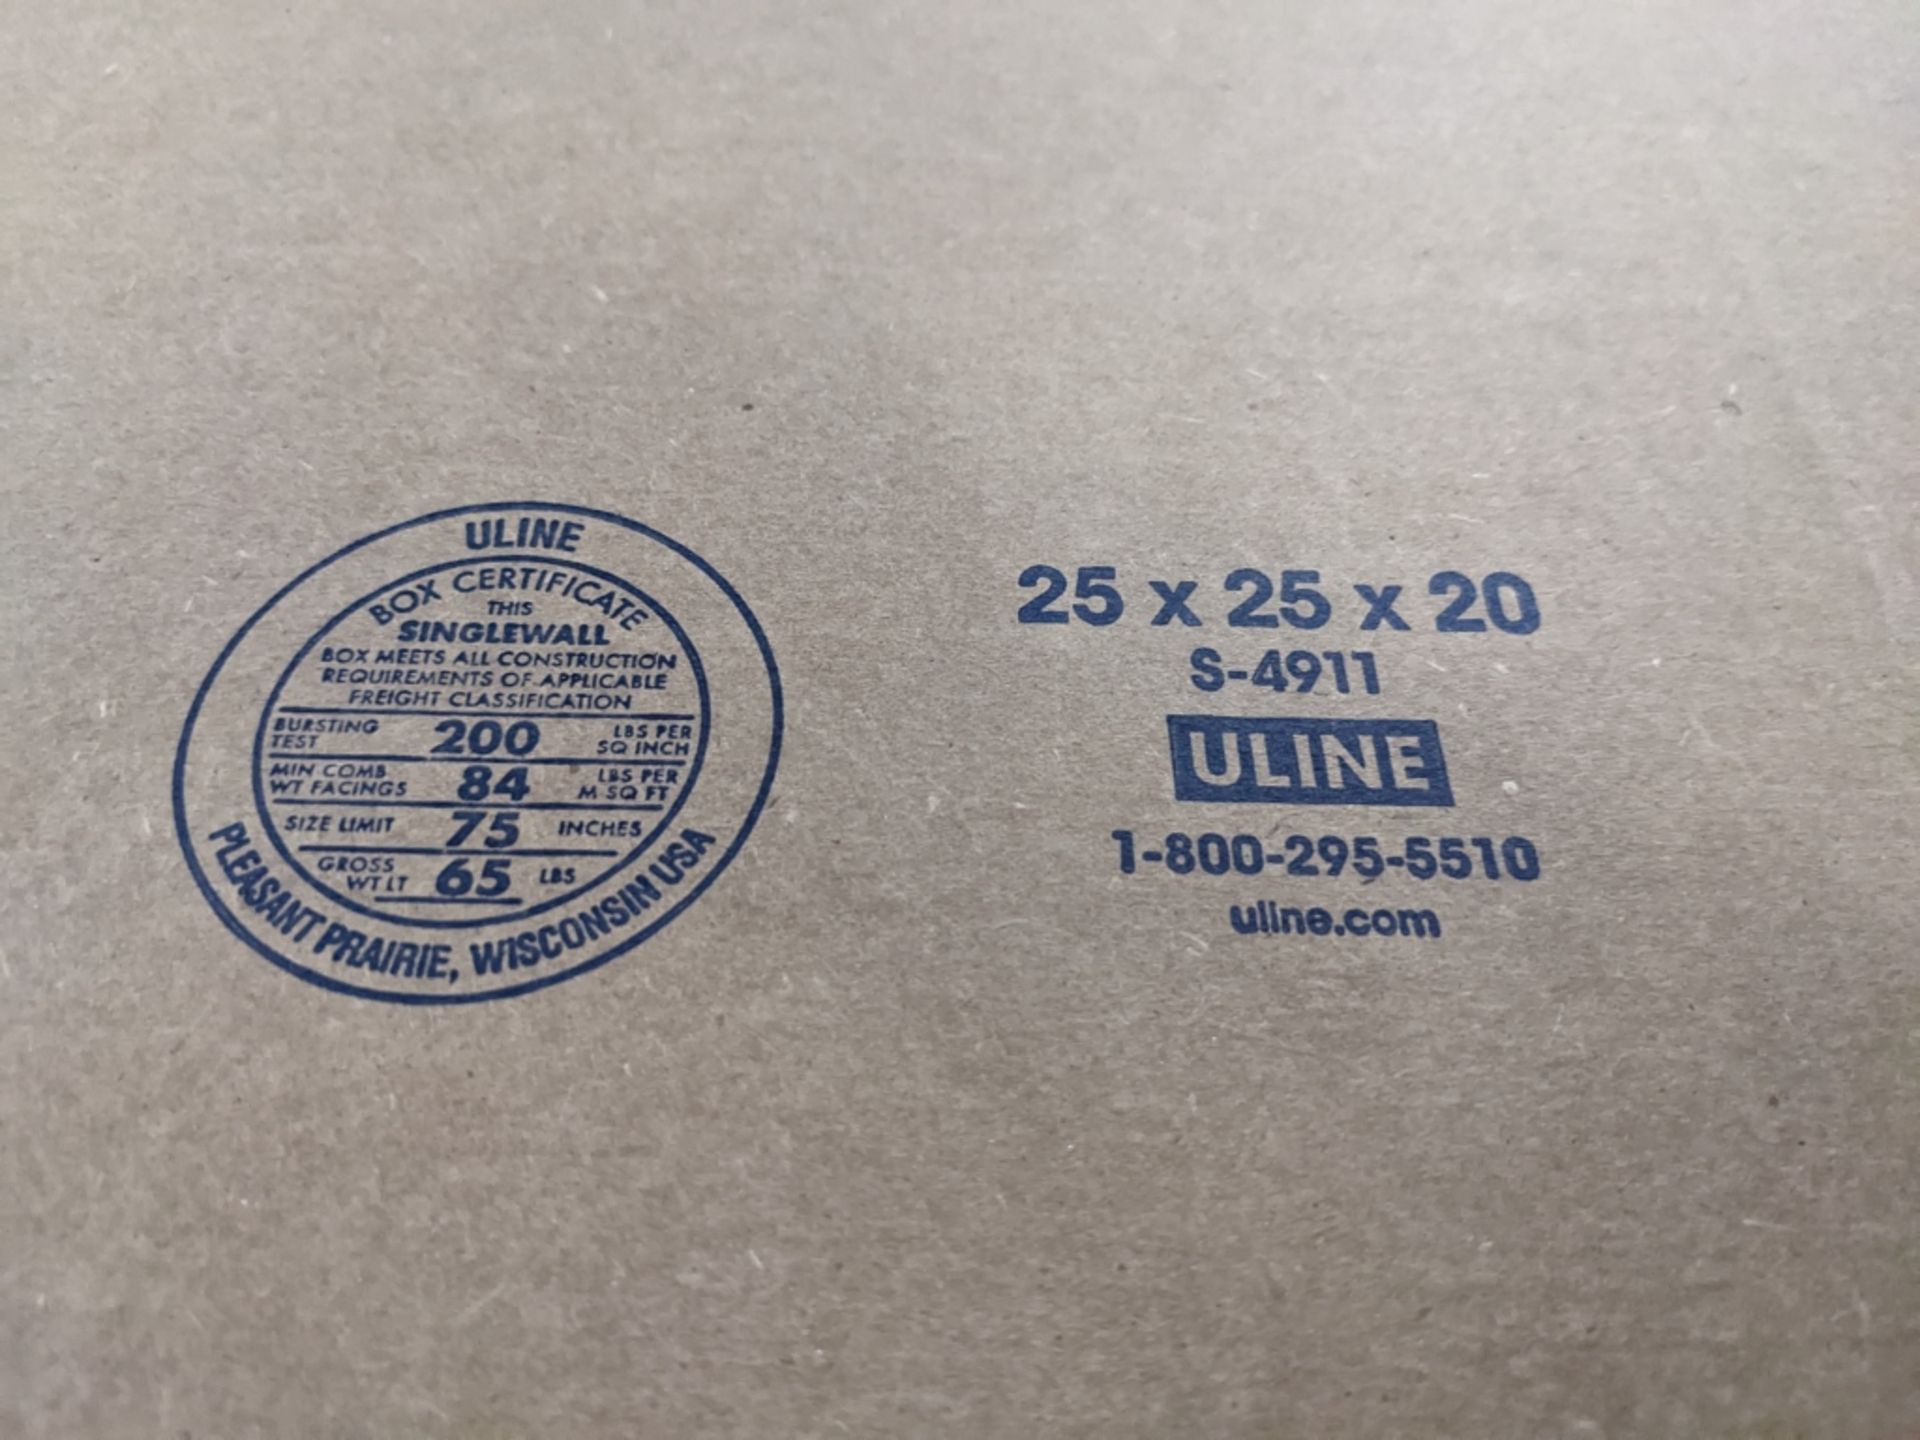 Pallet of Uline 25 x 25 x 20 Shipping Boxes. - Image 4 of 4